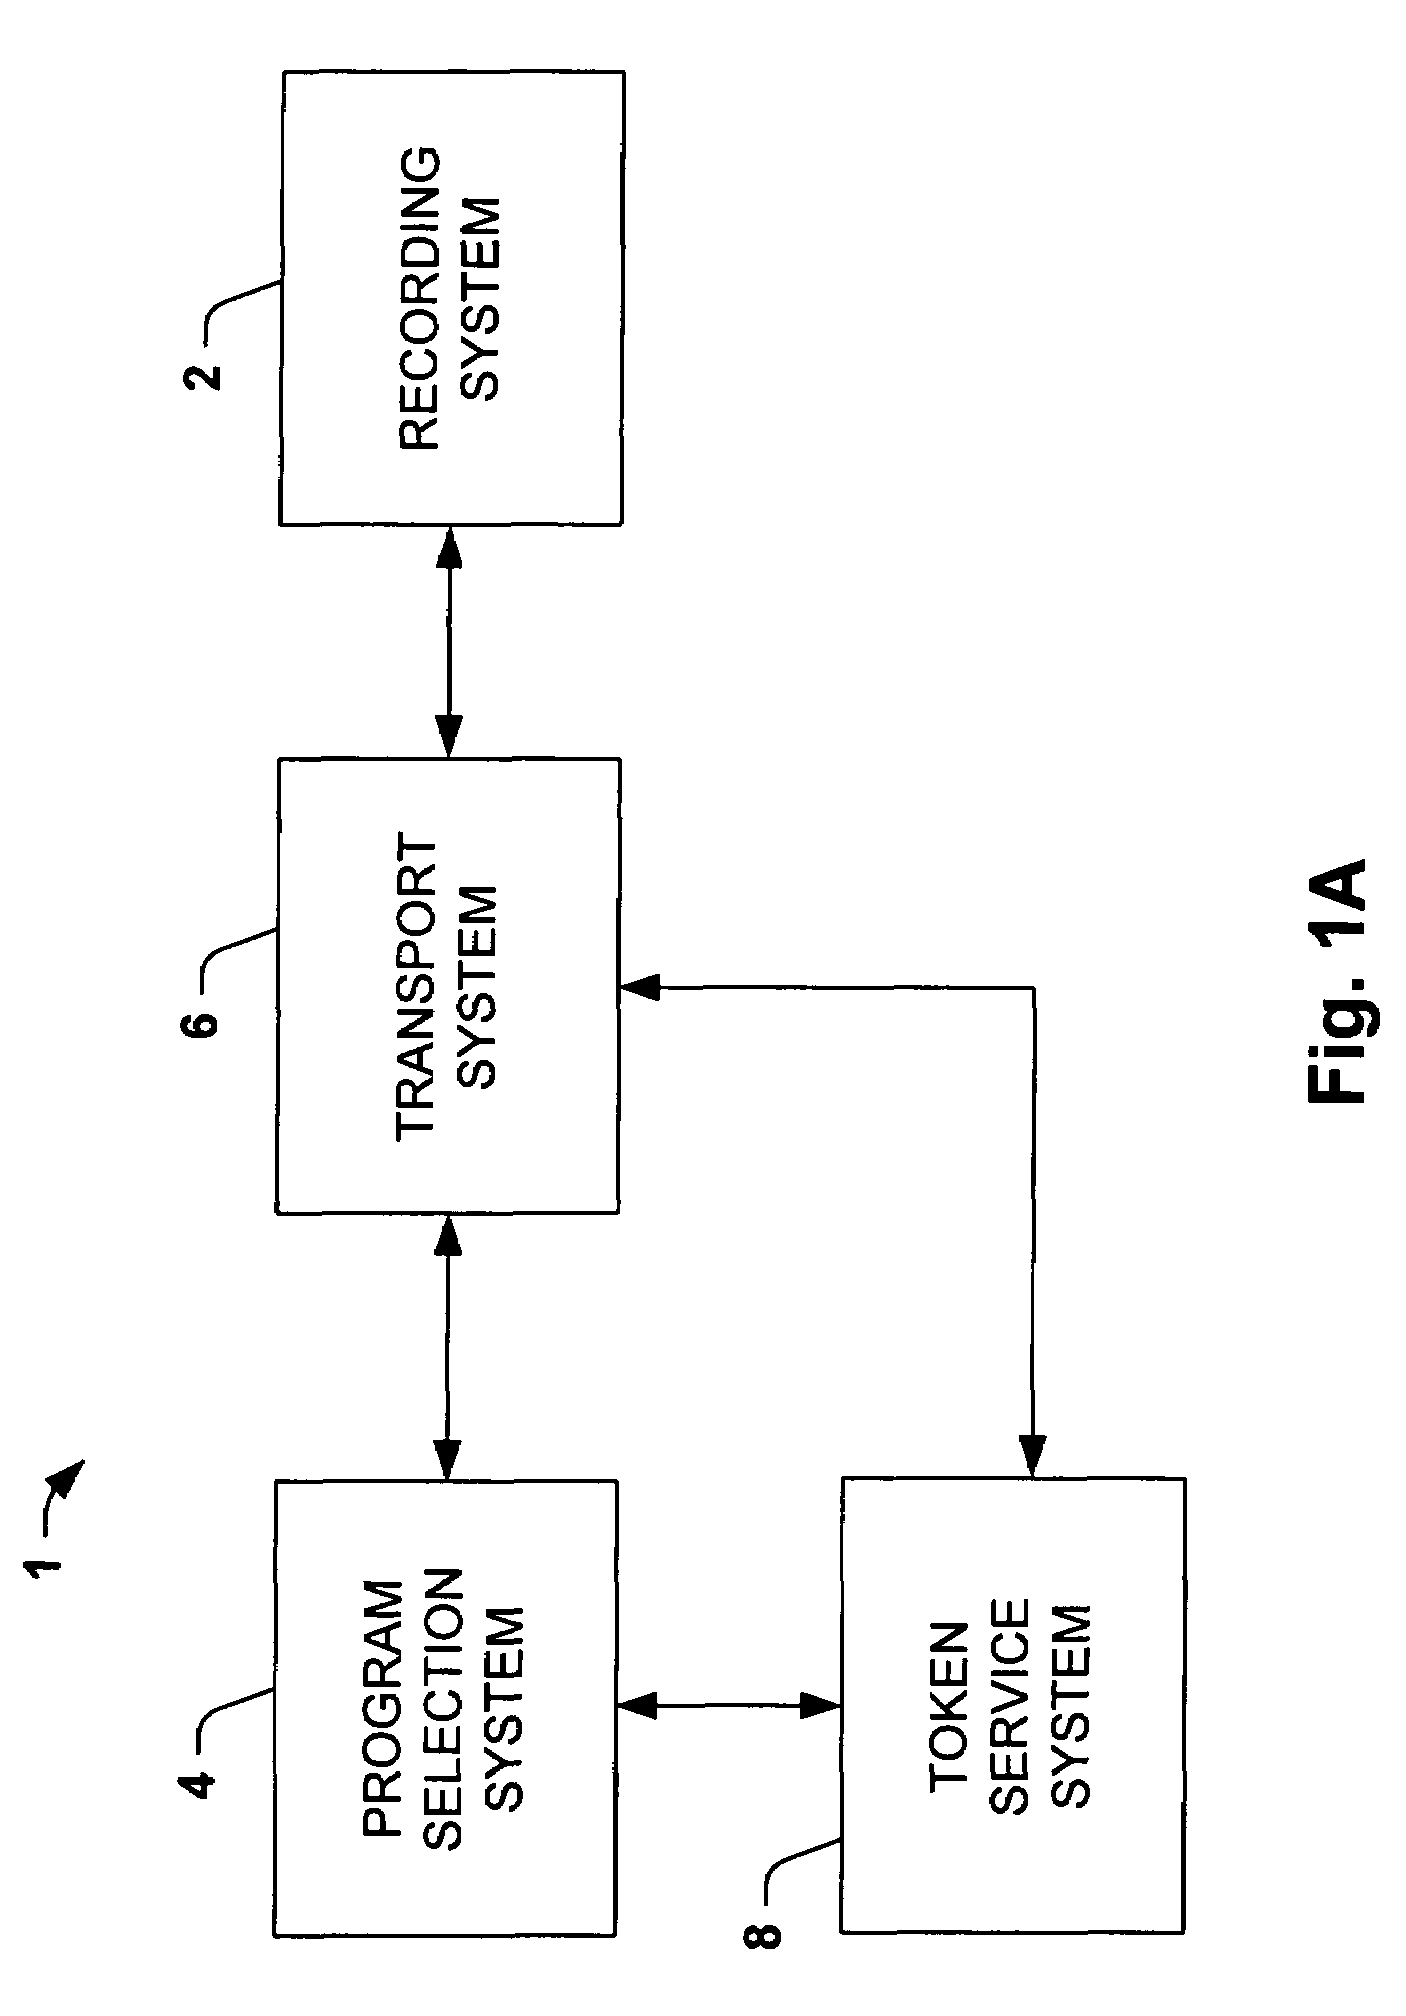 System and method to facilitate selection and programming of an associated audio/visual system